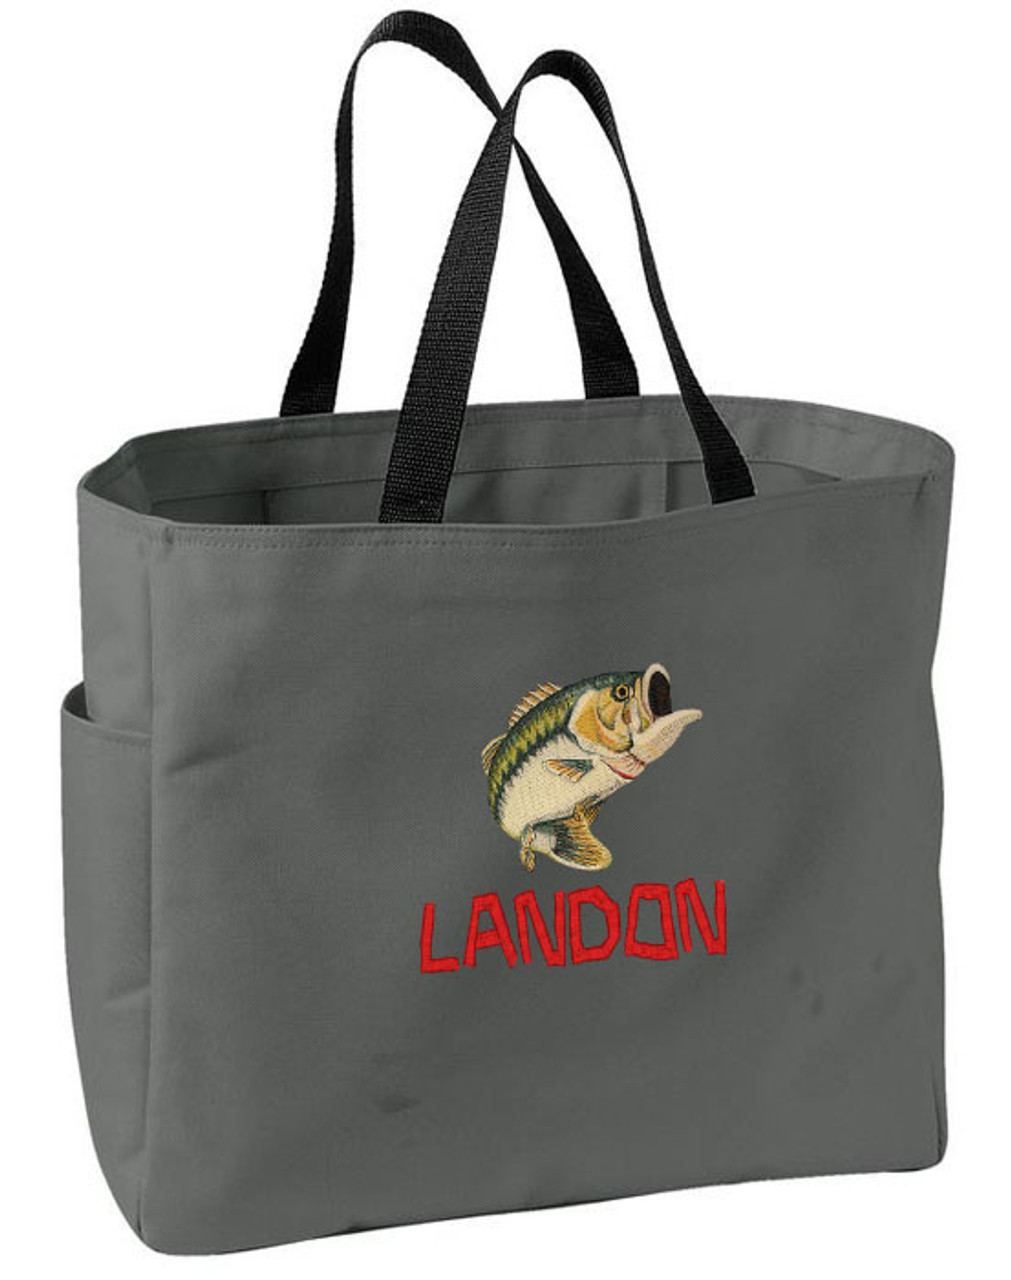 Fishing Bass Essential Tote Bag Personalized - Embroidered